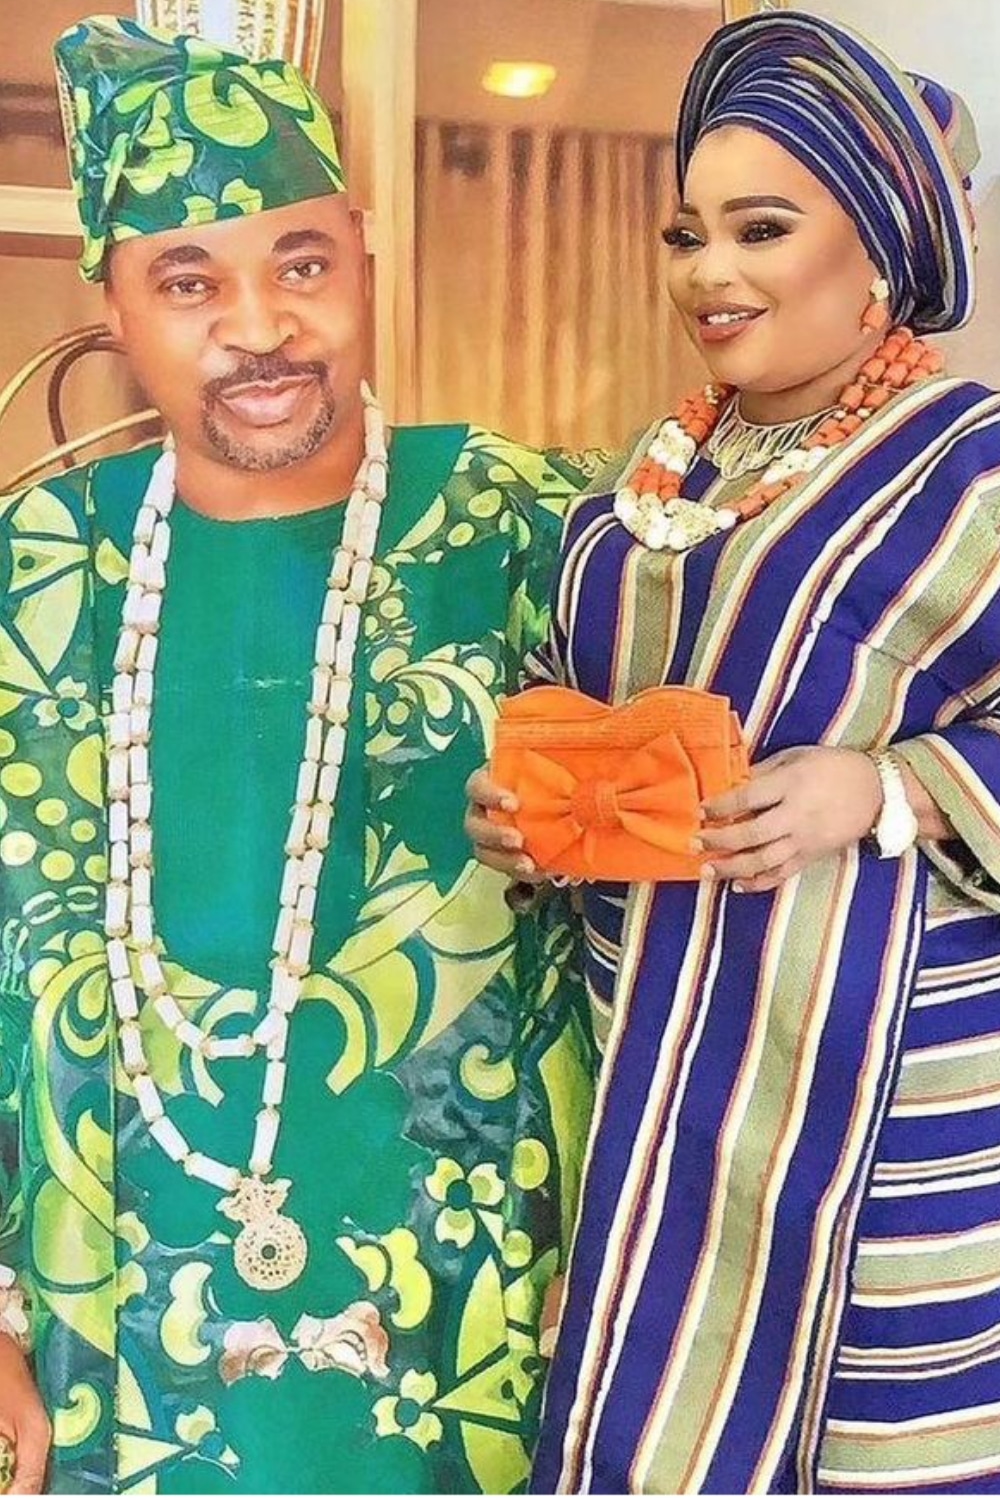 "A love like no other" - MC Oluomo pours out his heart on his first wife's birthday